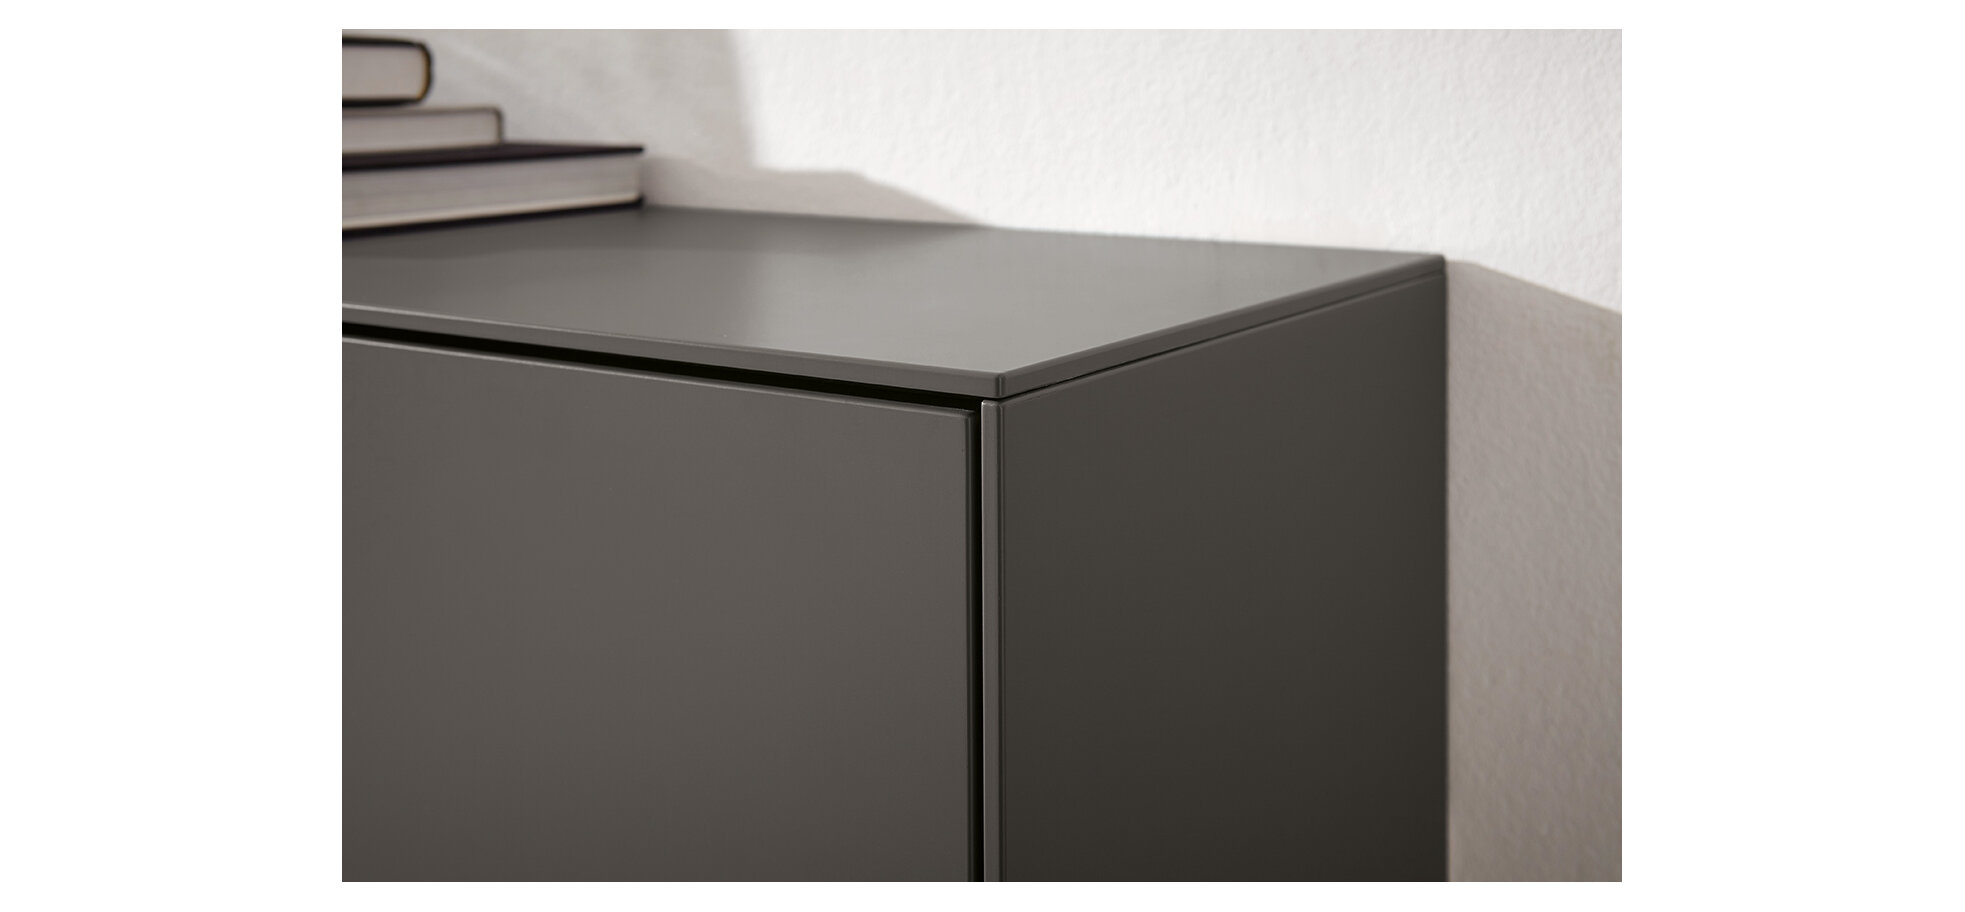 Highboard Natura Tucson - inkl. Beleuchtung, Lack, Anthrazit